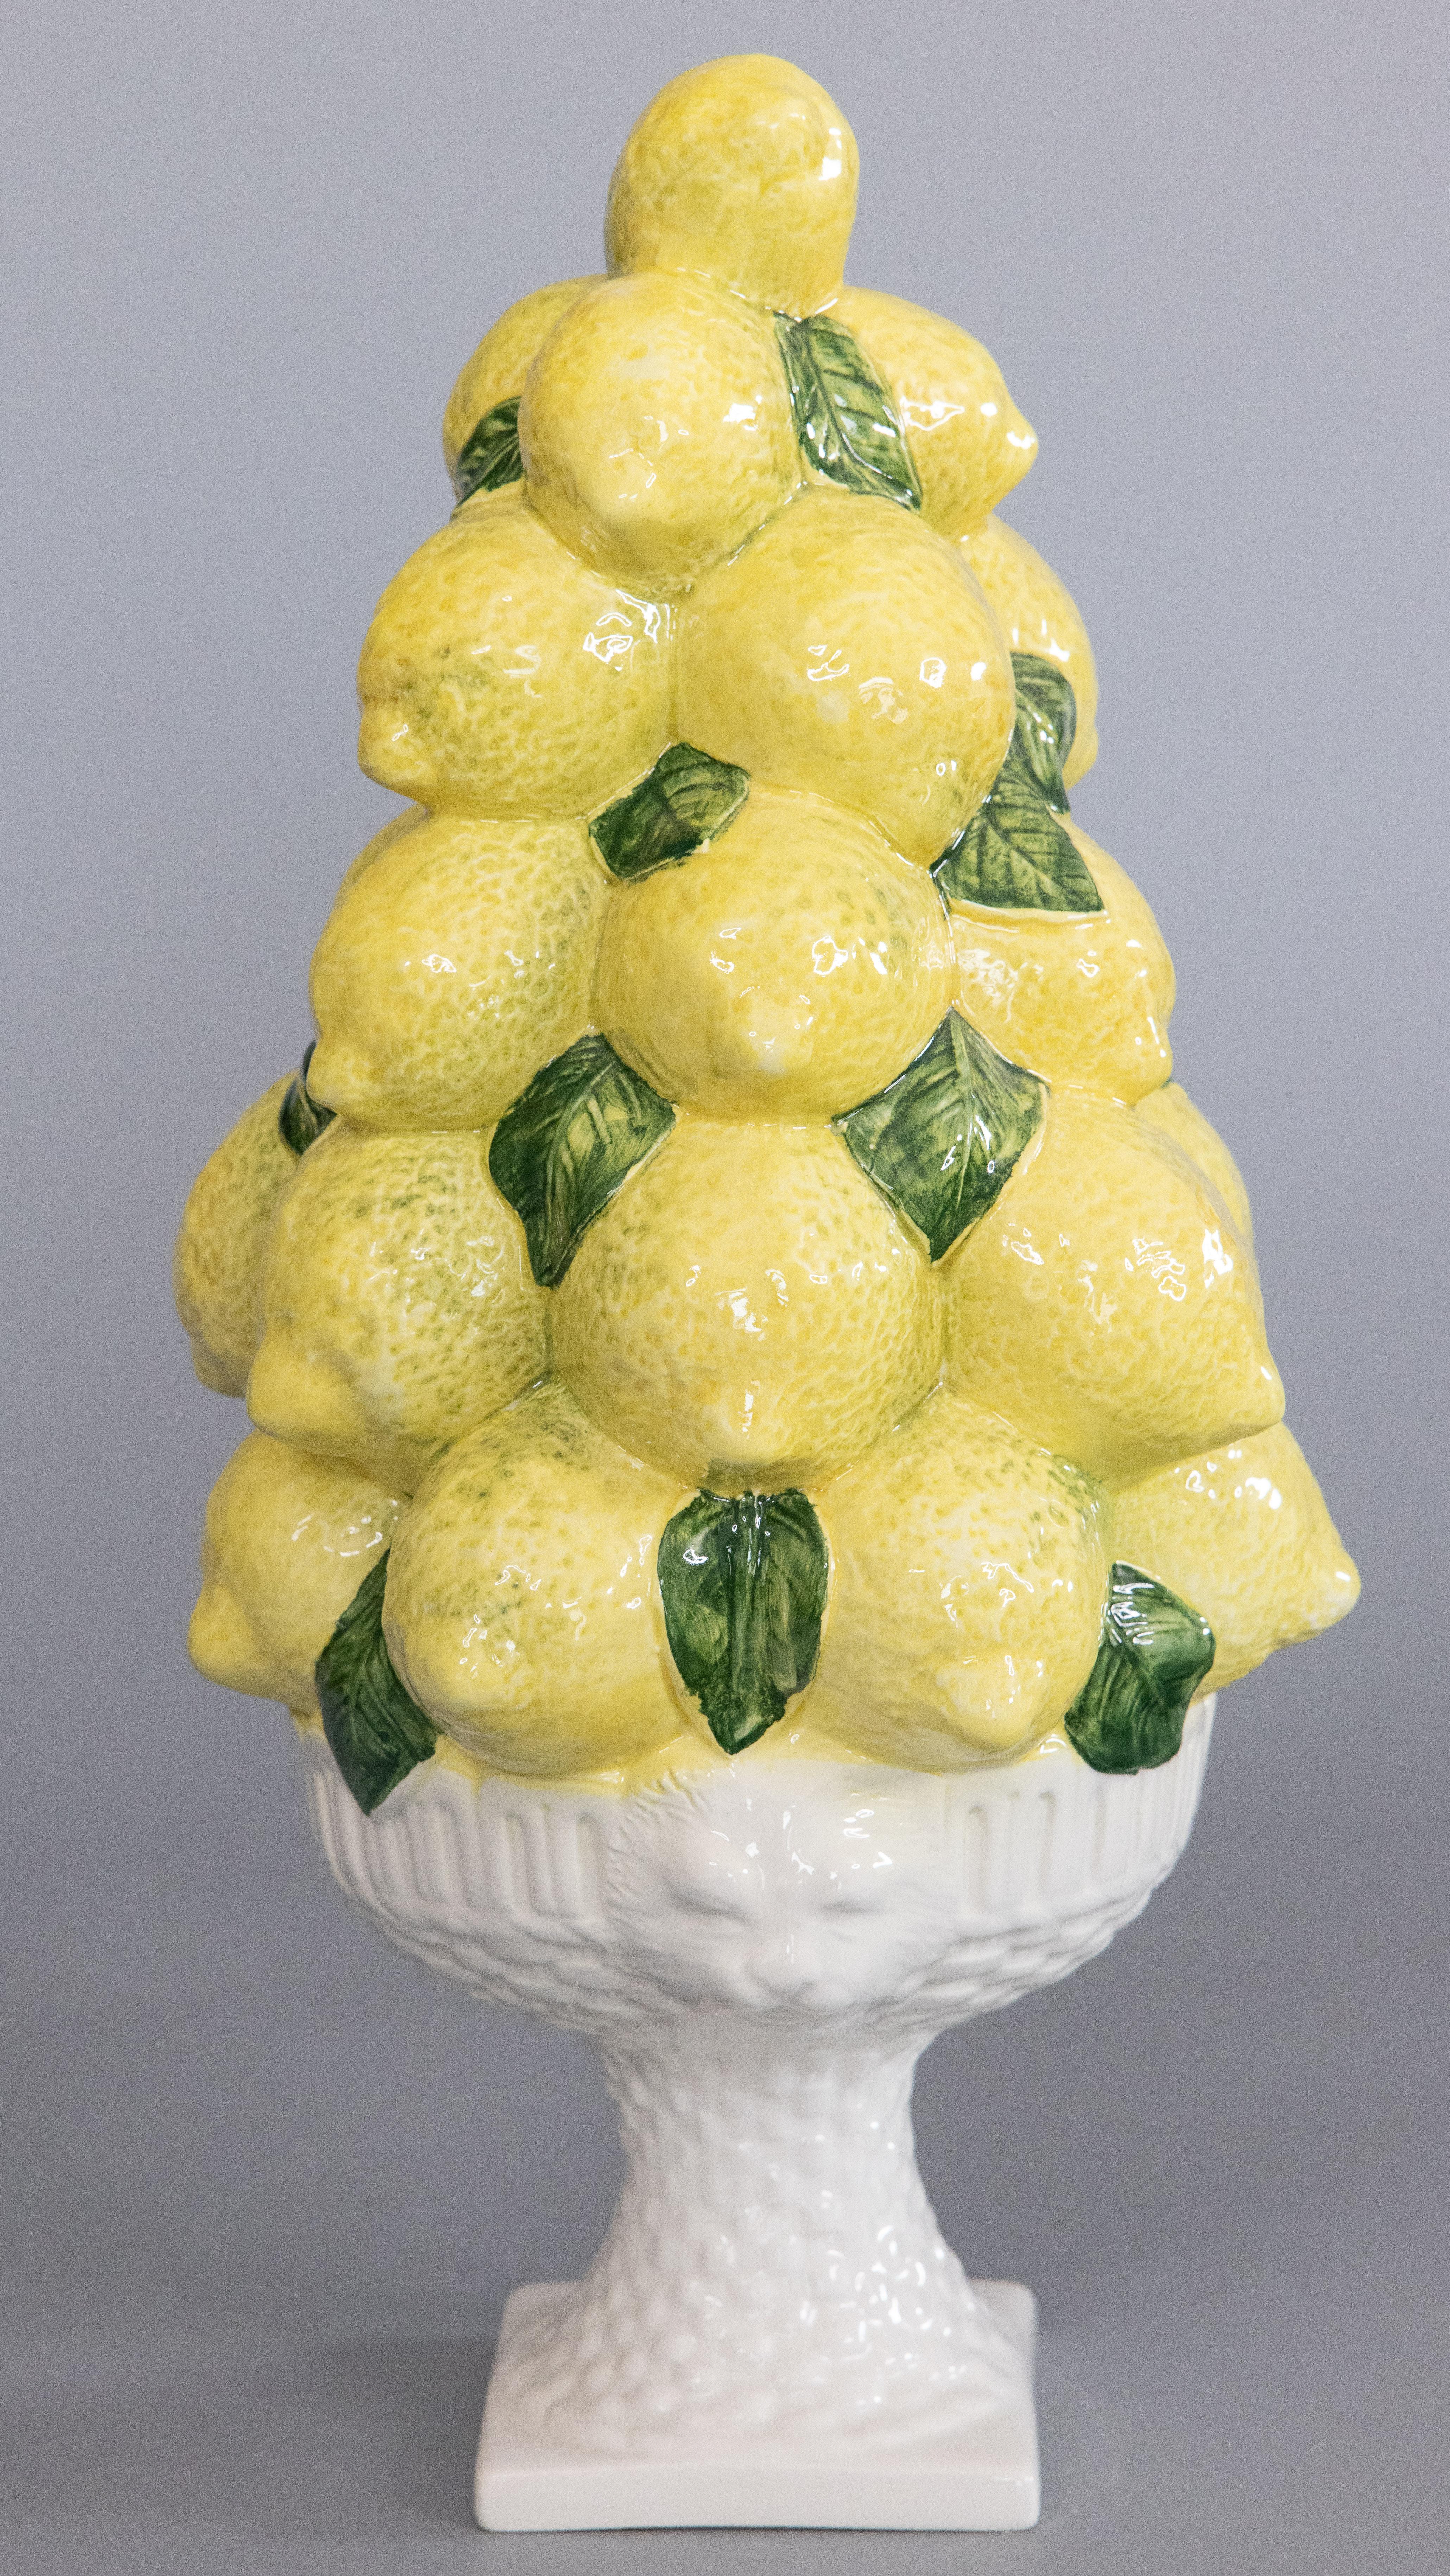 A lovely vintage Mid-Century Italian majolica lemons topiary centerpiece on an ornate white pedestal with lion heads. Signed 